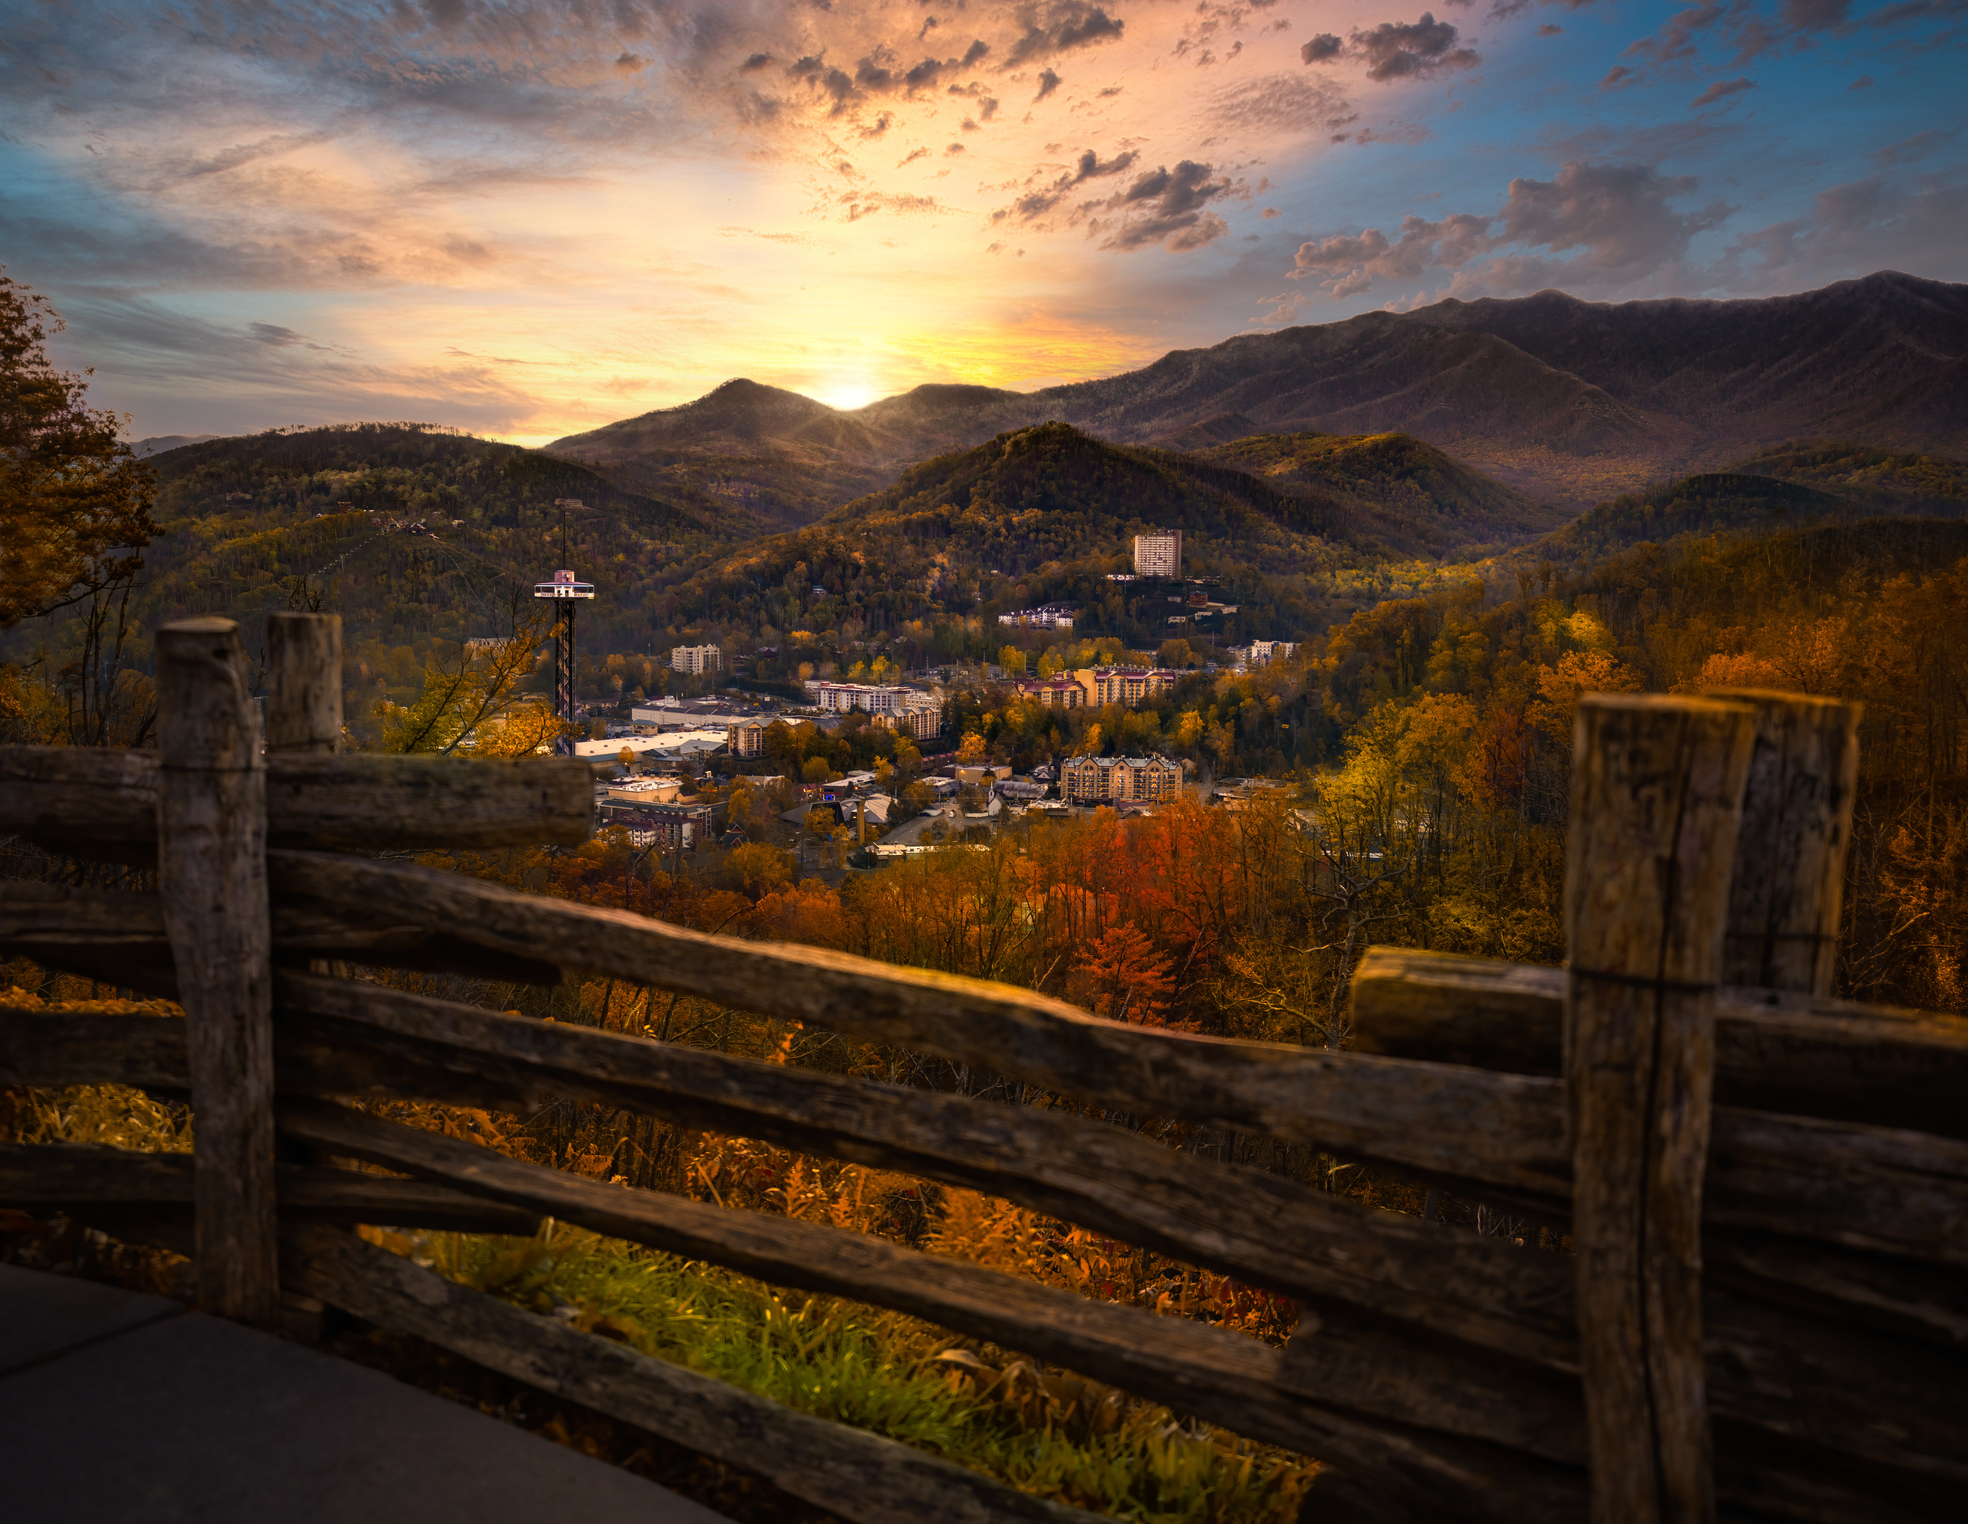 View of a town nestled in autumnal mountains at sunset, seen from behind a rustic wooden fence